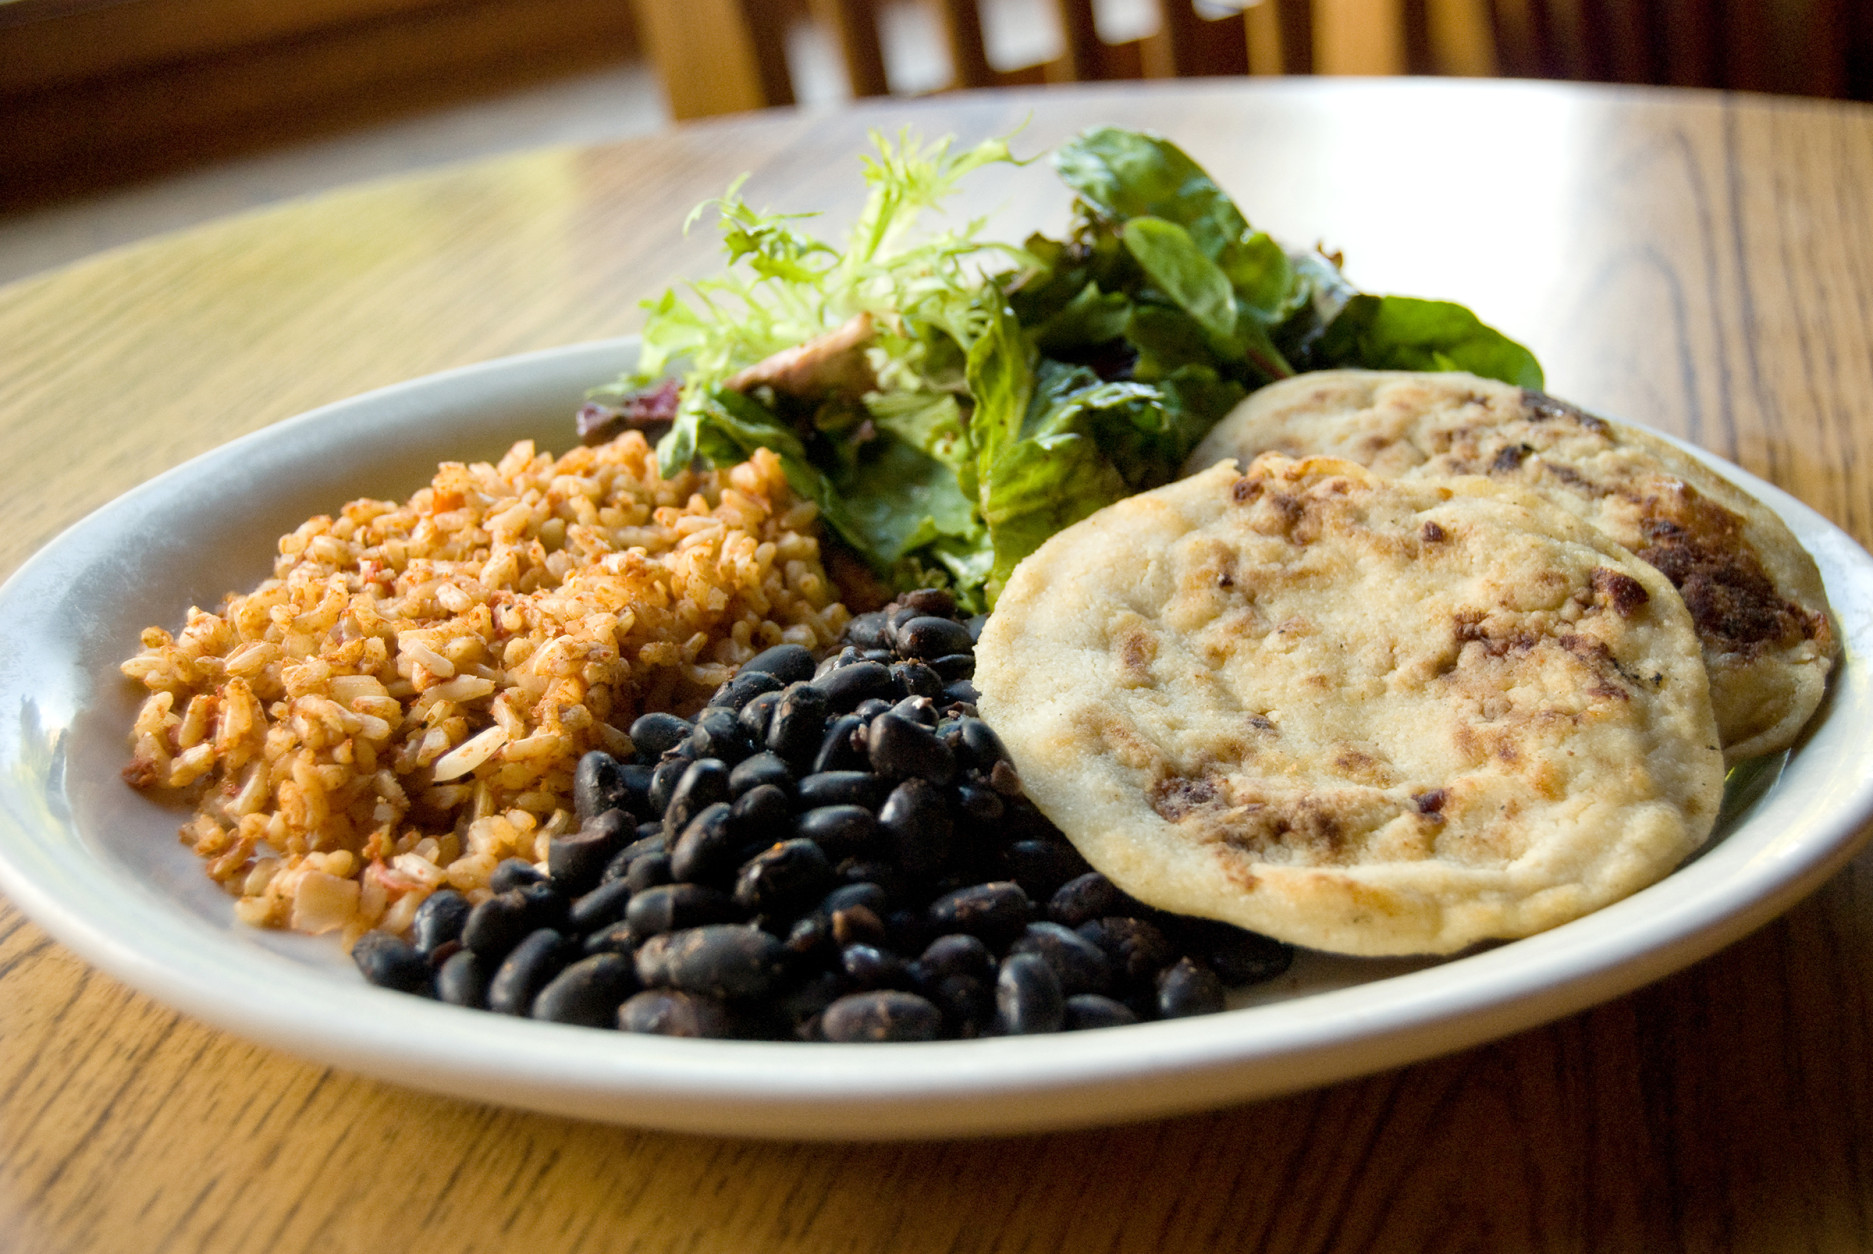 Papusas (stuffed tortillas) served with black beans, rice, and a microgreen salad.